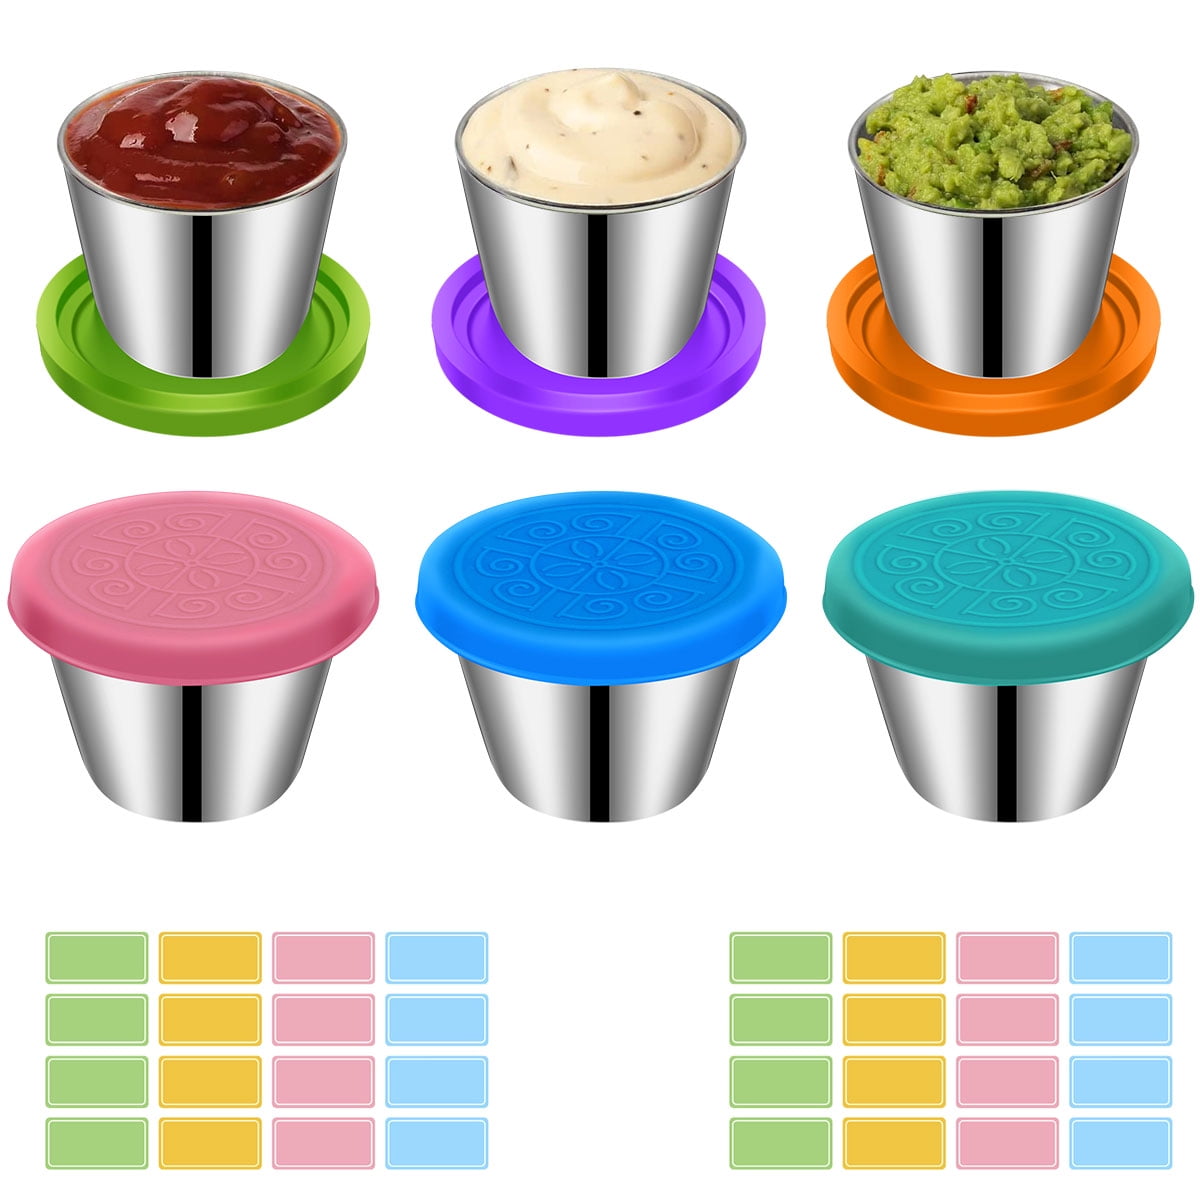  Mini Metal Containers with Lids Stainless Steel Salad Dressing  Container with Lids Sets Inculde 2Pcs Mini Silicone Jar Spatula Scraper and  6 Pcs 1.8 Oz Dressing Containers To Go for Condiments